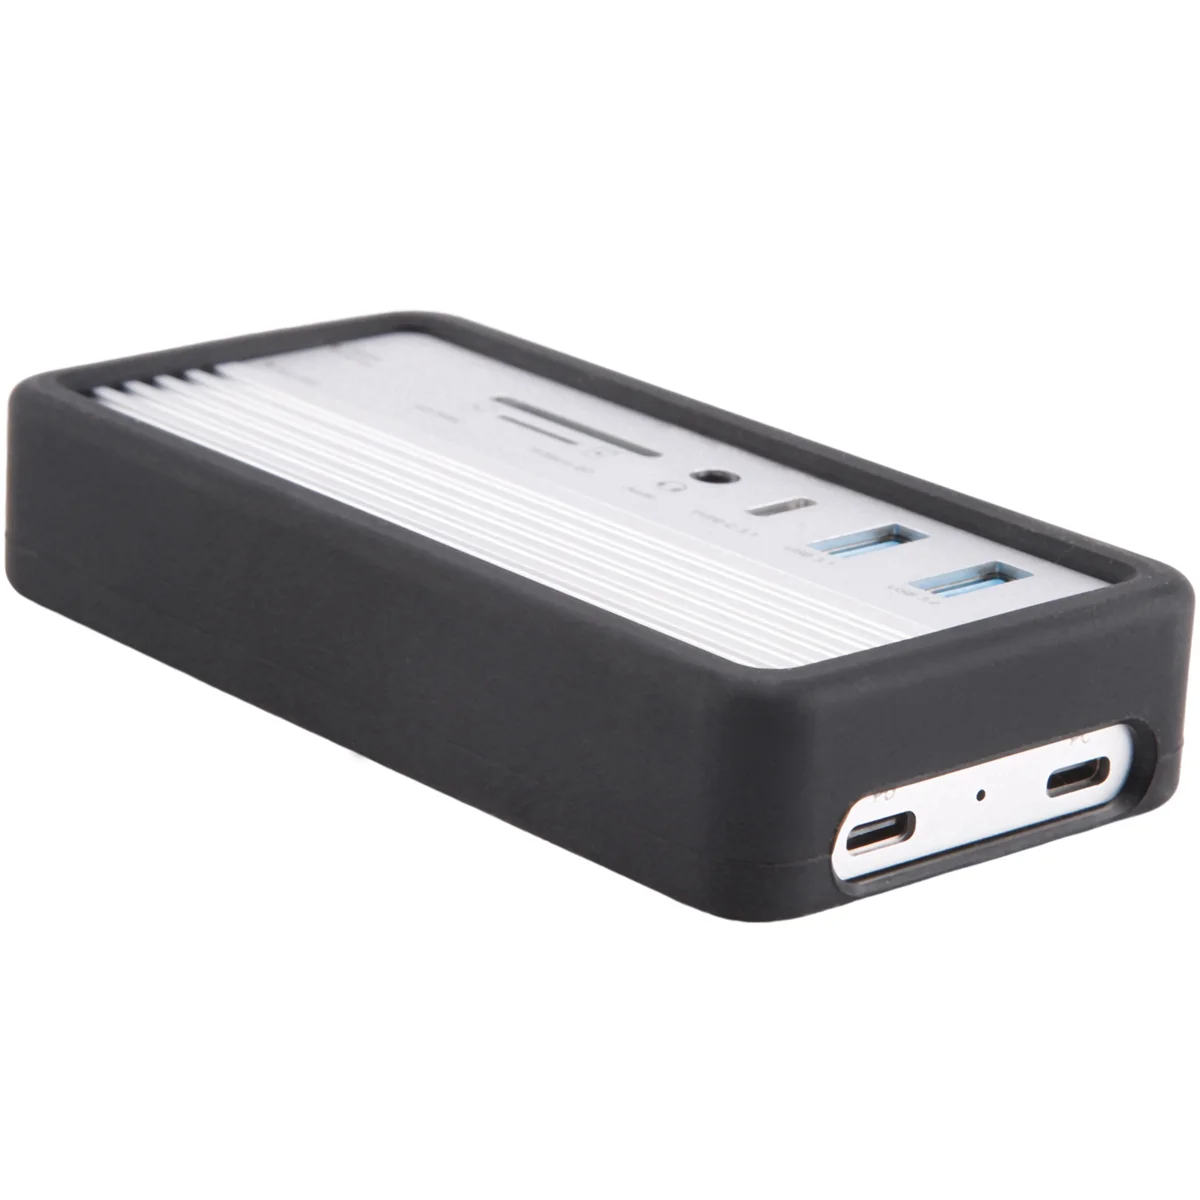 

ACASIS USB-C HUB 10 in 1 Docking Station for M.2 NVME and SATA NGFF SSD with HDMI Support 8TB for Windows/MAC/IPAD